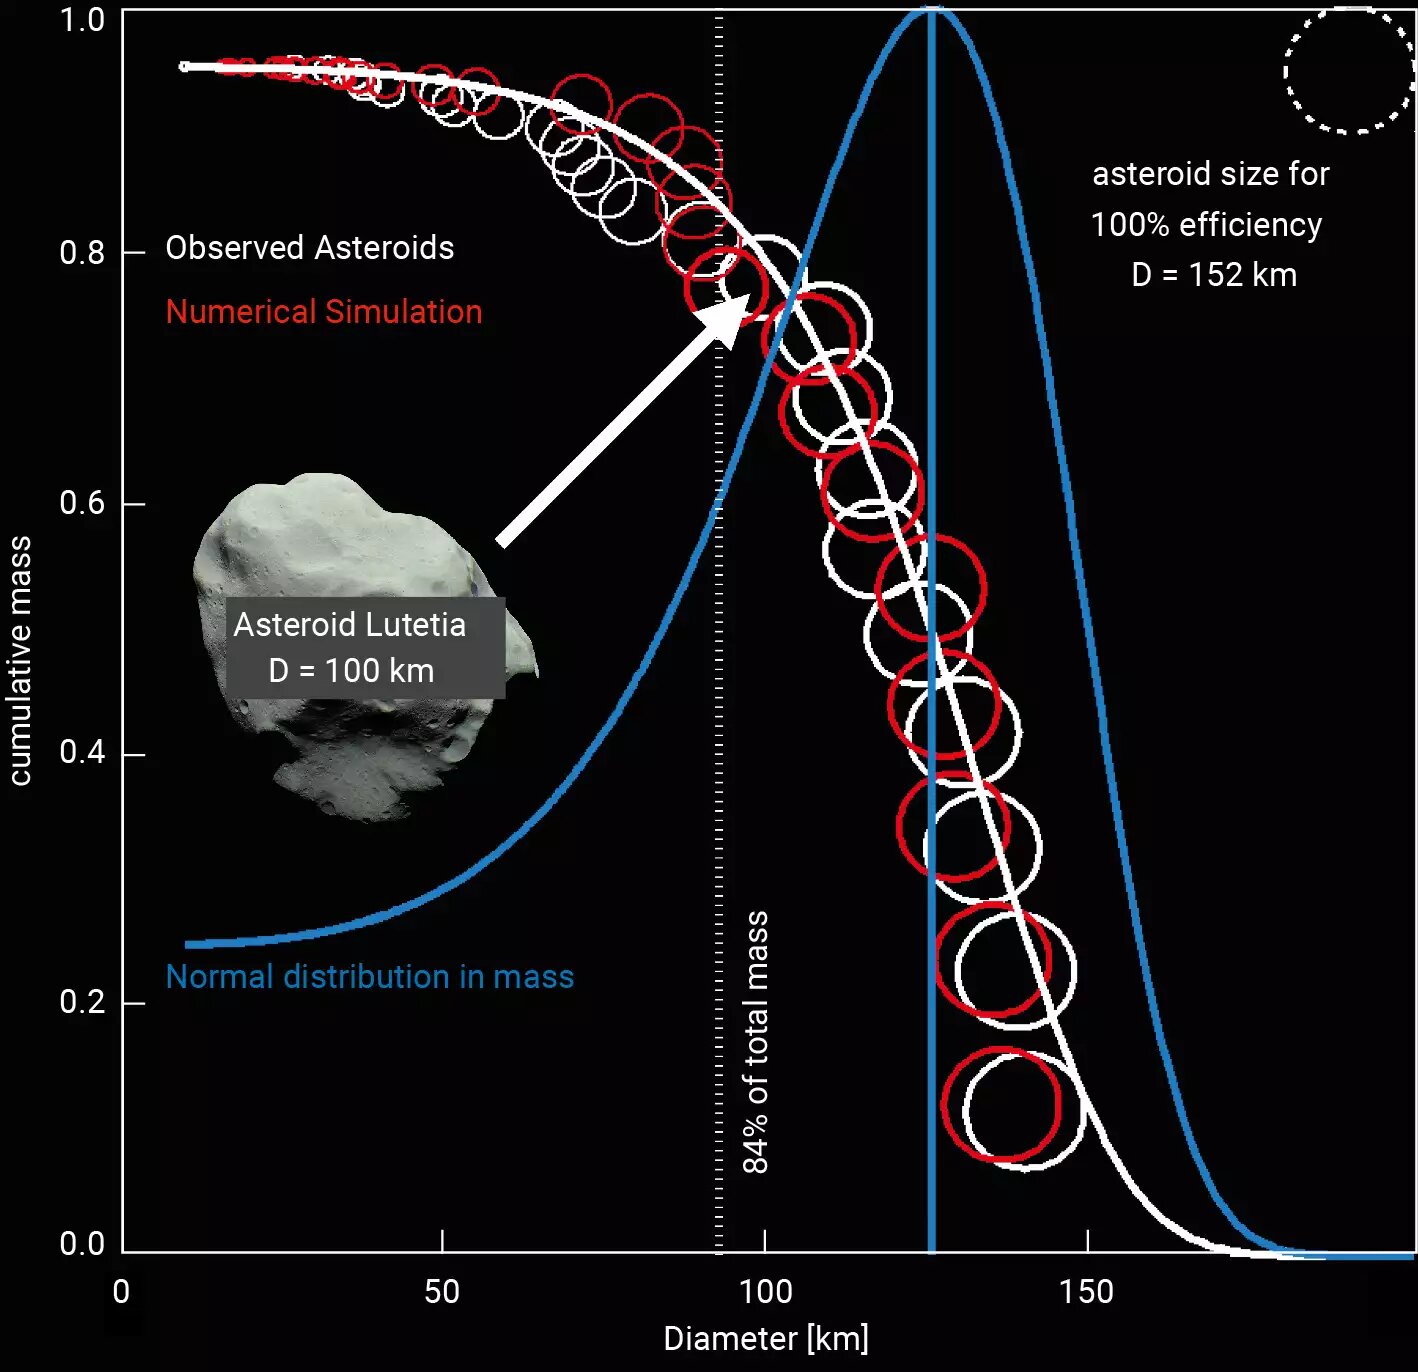 Numerical simulations of planetesimal formation reproduce key properties of asteroids, comets